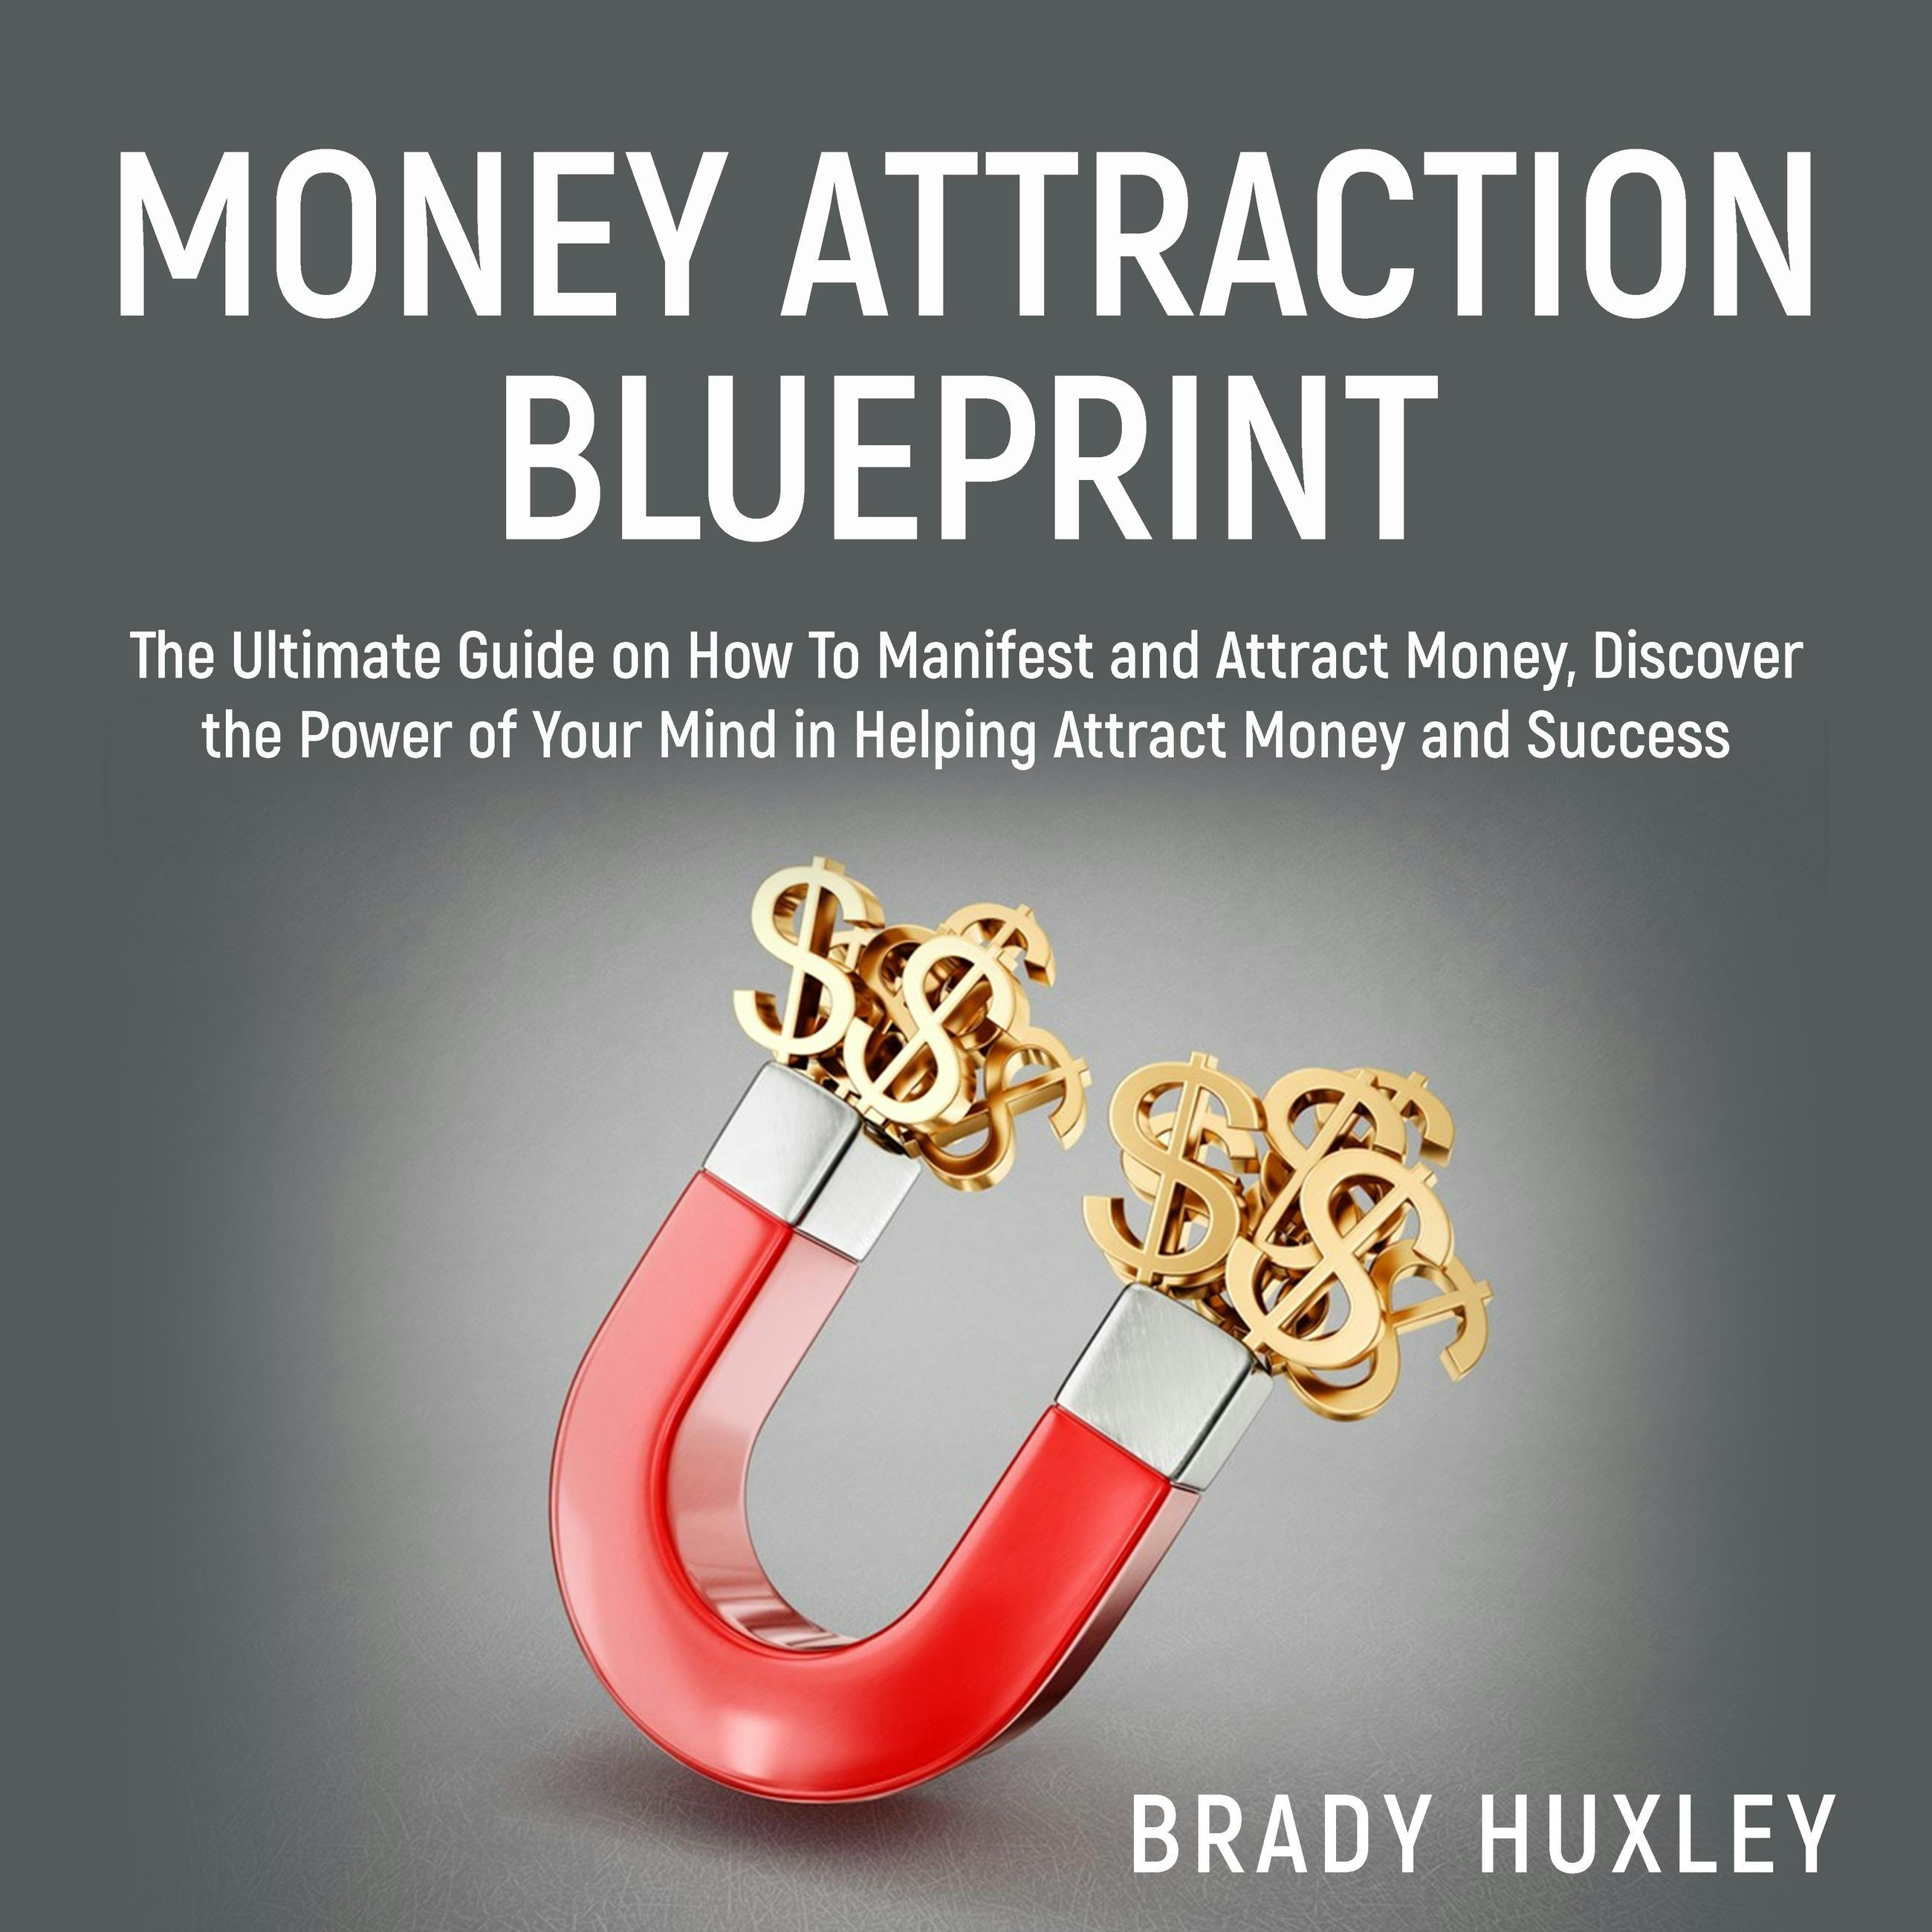 Money Attraction Blueprint: The Ultimate Guide on How To Manifest and Attract Money, Discover the Power of Your Mind in Helping Attract Money and Success - Brady Huxley